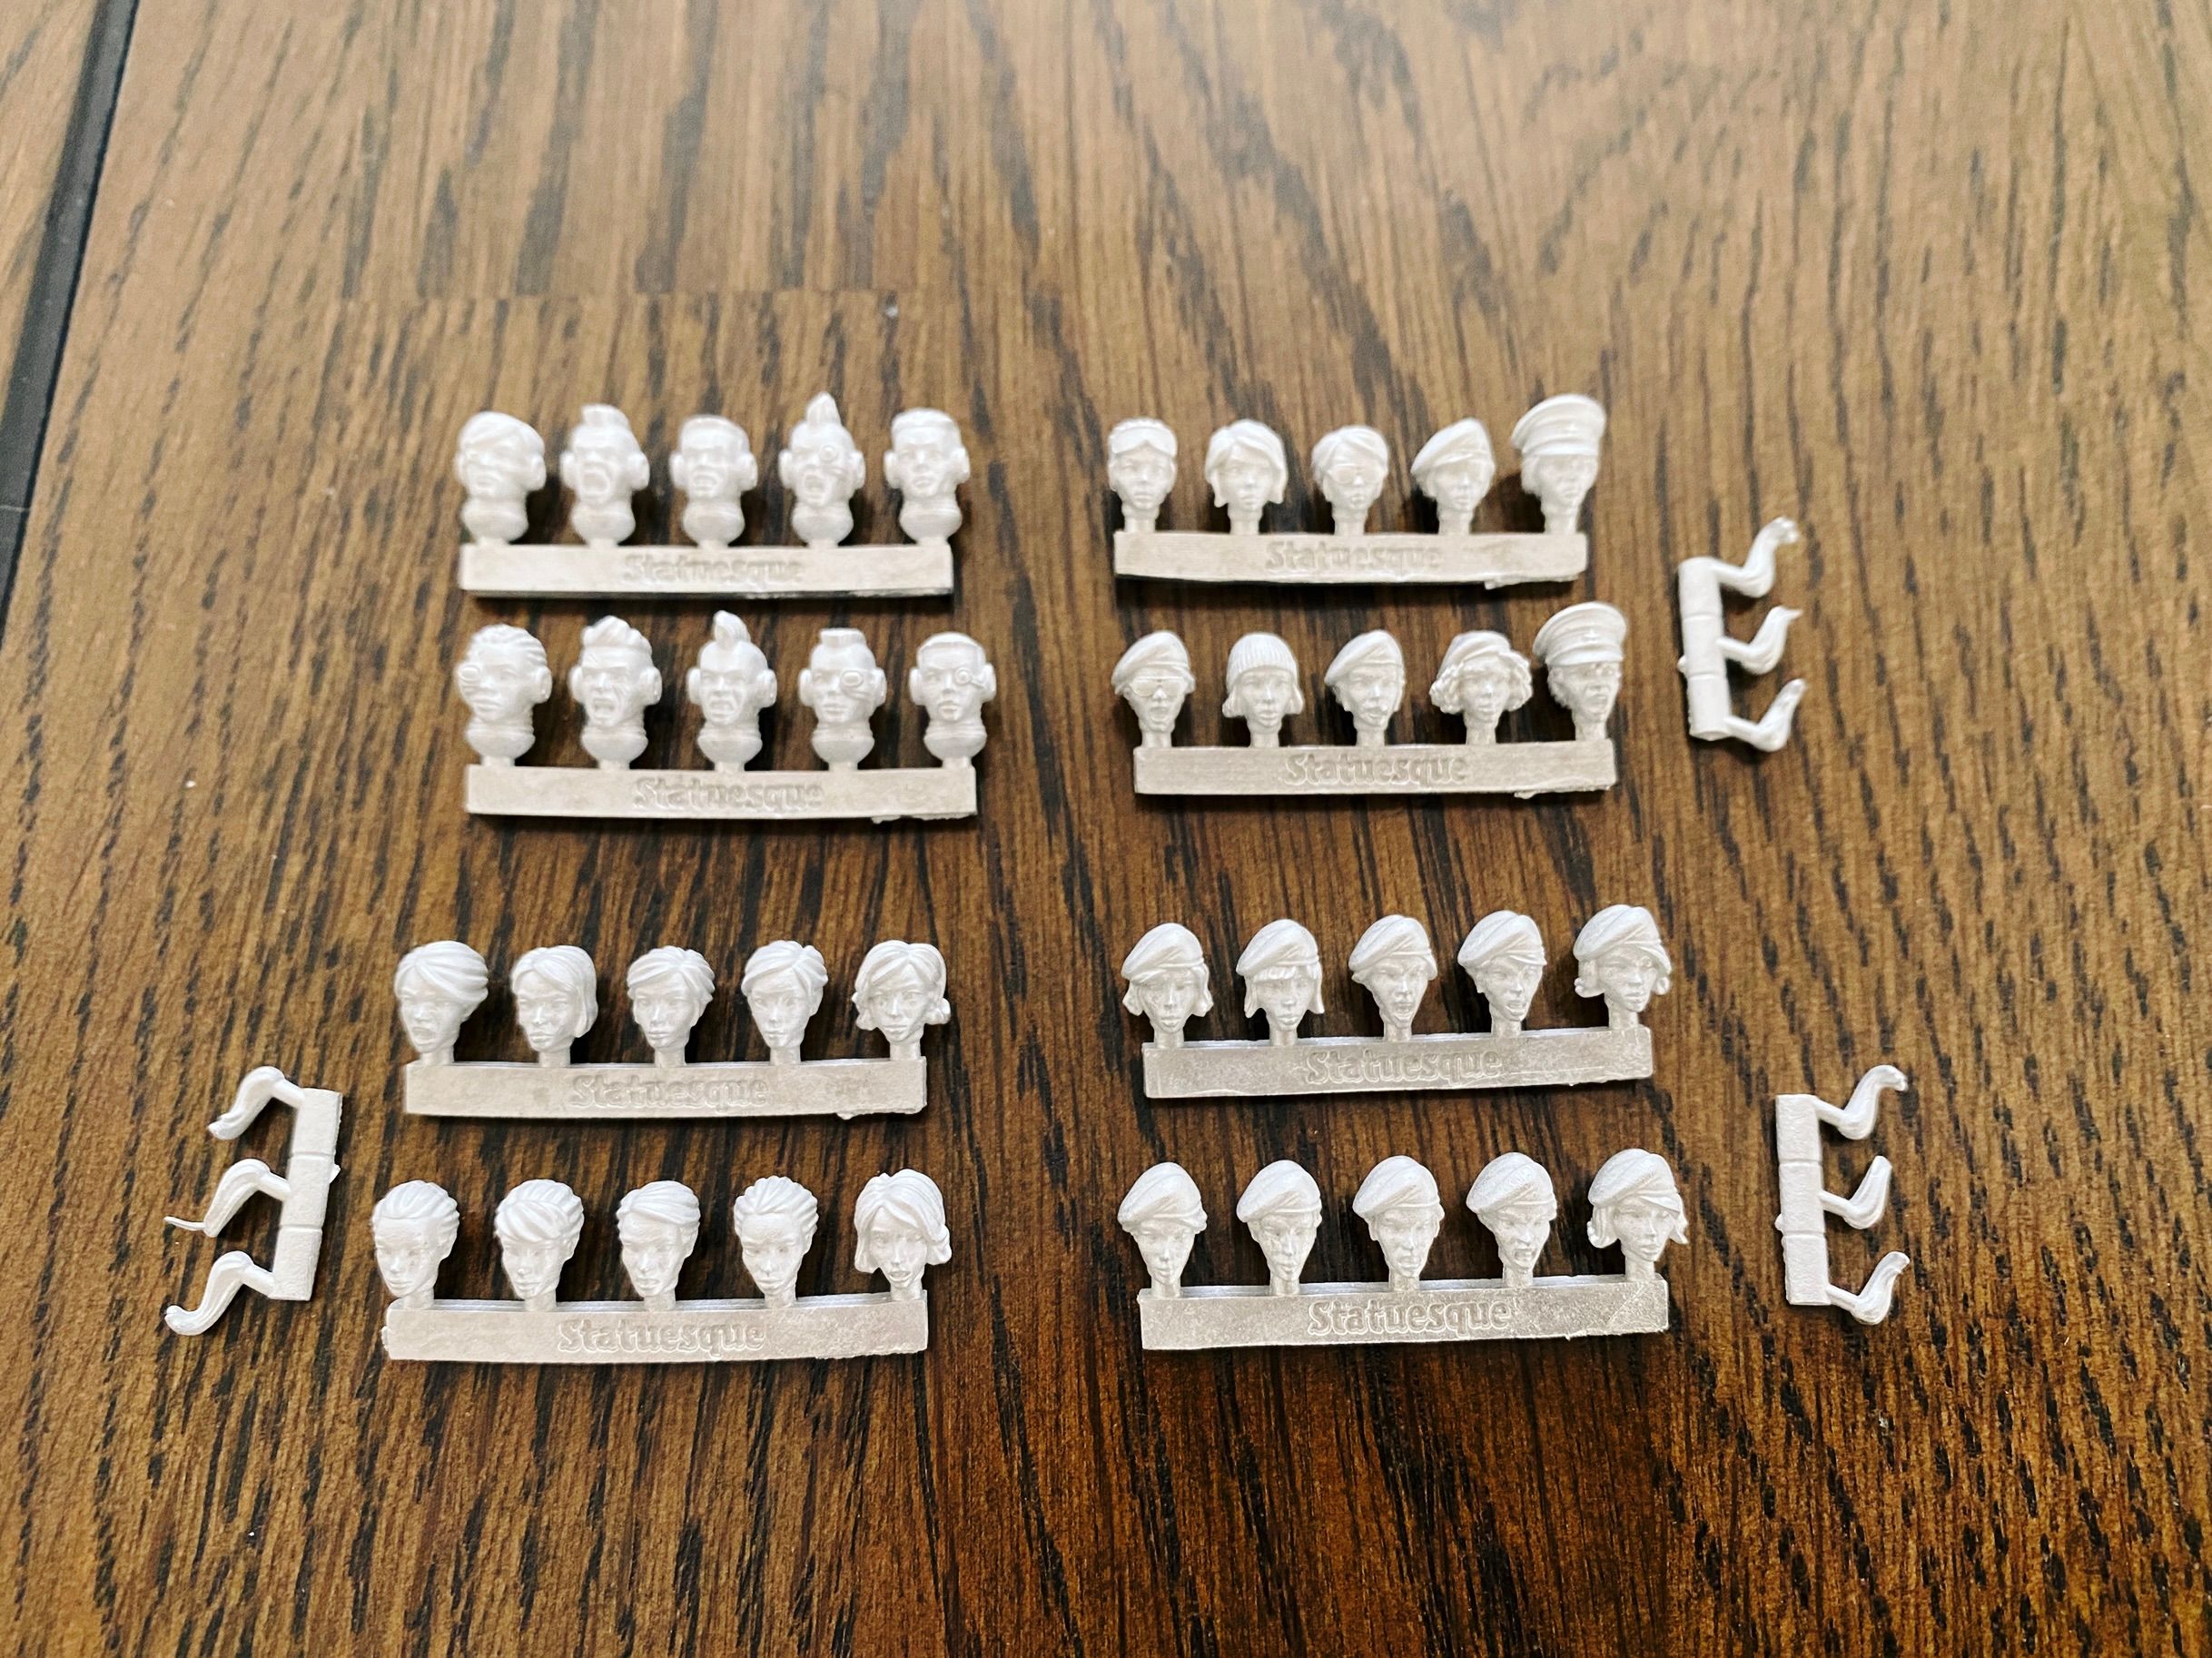 A photo of four sets of ten female heads for Warhammer 40,000-sized miniatures. One set has mohawks and cybernetic implants, one has a selection of "grizzled veteran" headgear like a beret, a beanie, sunglasses, one has a cigar, etc. The third set all have berets on, and the last have no headgear at all.